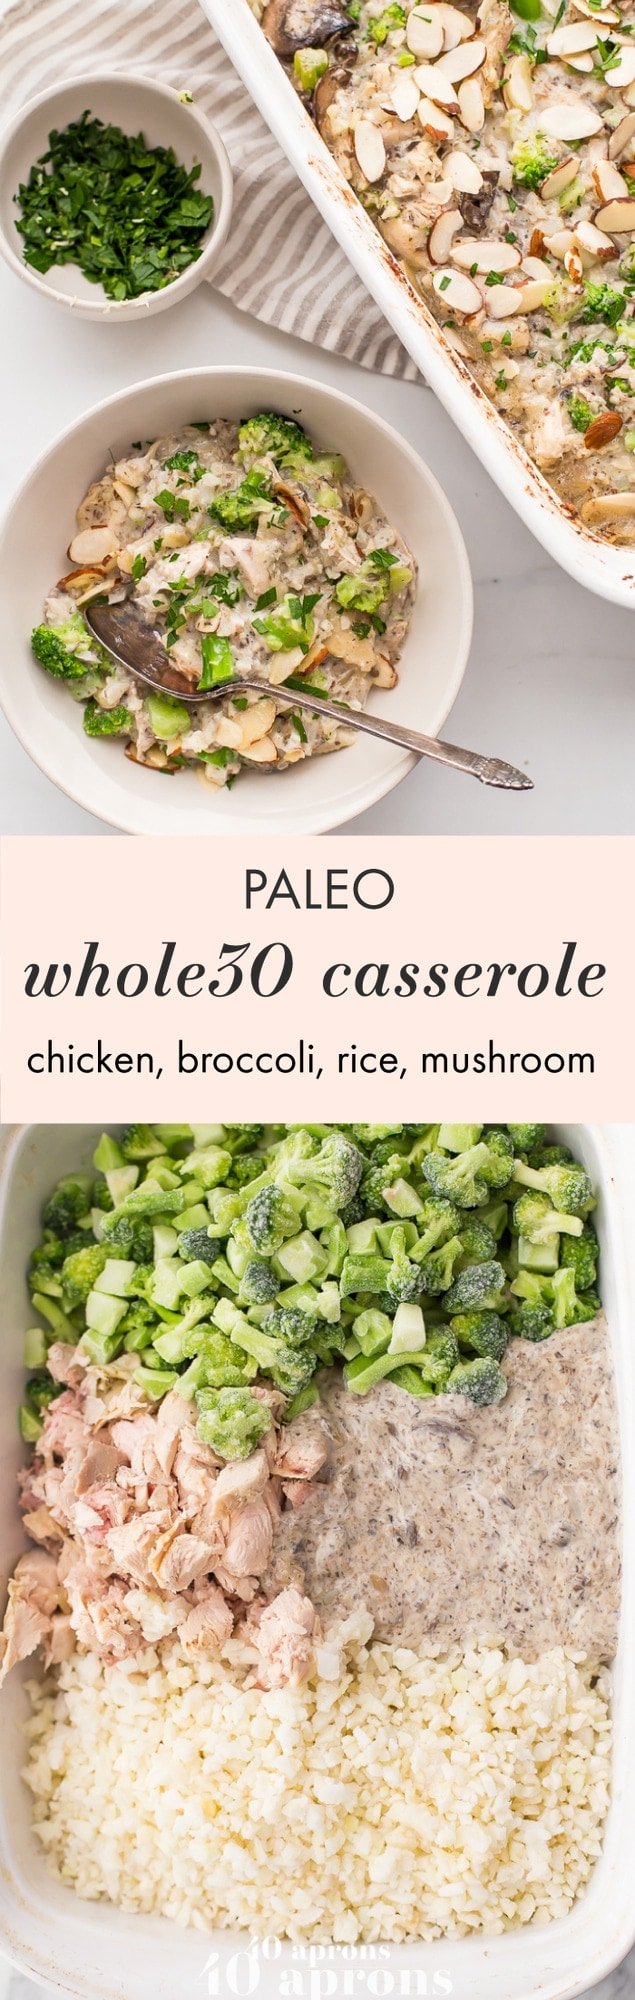 This Whole30 casserole is a perfect Whole30 fall recipe, loaded with warming and filling ingredients. This Whole30 casserole is made with chicken, broccoli, cauliflower rice, and mushrooms, making it full of protein, fiber, and healthy fats! This Whole30 casserole makes plenty of leftovers, making healthy lunches easy. With a homemade cream of mushroom soup, you'll love this Whole30 casserole on a round or anytime.